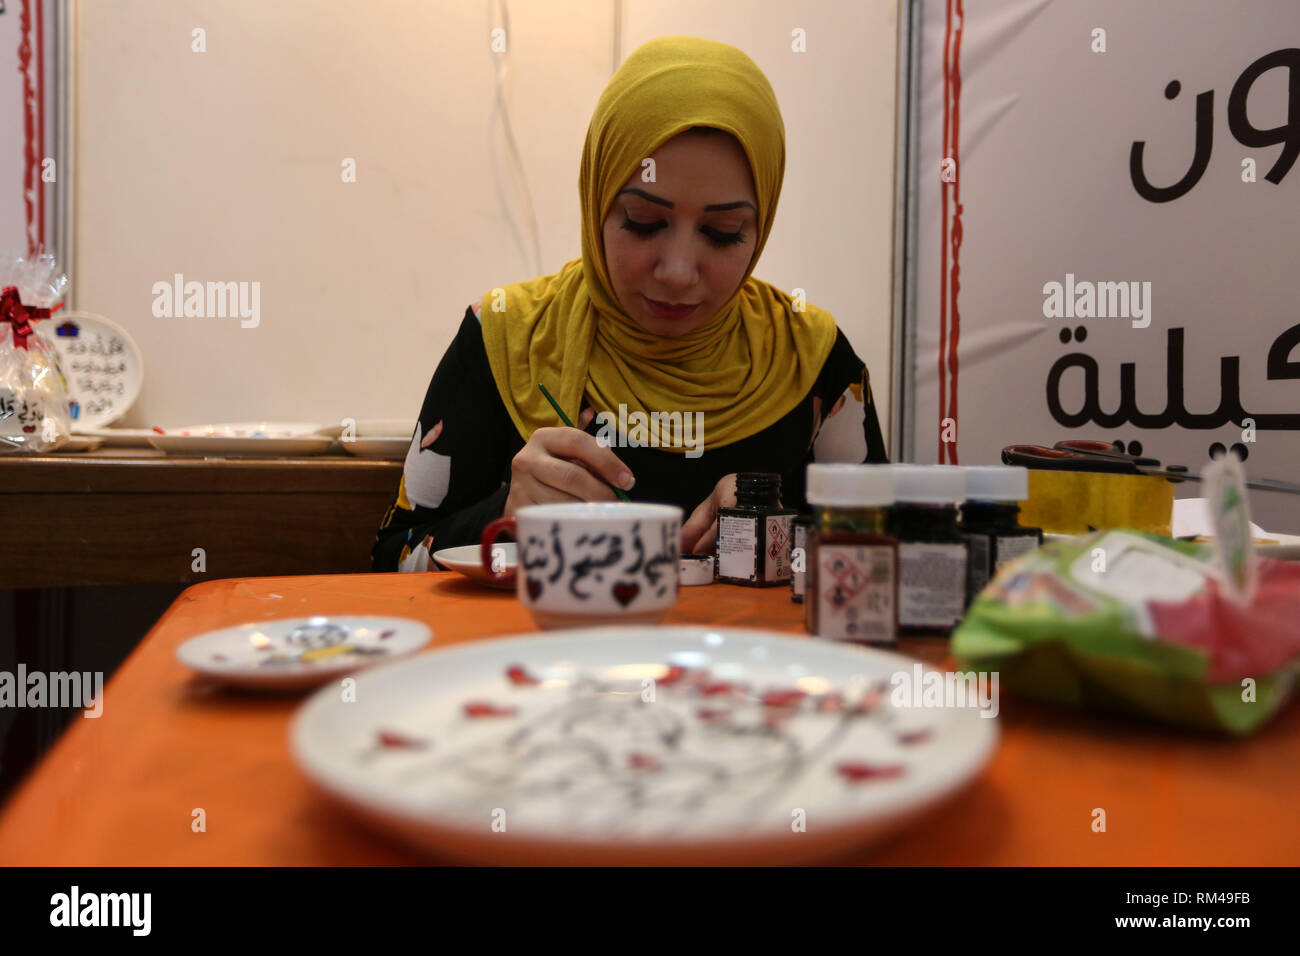 Gaza. 13th Feb, 2019. A Palestinian woman exhibits her products during a shopping festival in Gaza City, on Feb. 13, 2019. For the first time in the Palestinian Gaza Strip, a shopping festival has provided an opportunity for owners of emerging companies and businesses to display and market their products. Credit: Stringer/Xinhua/Alamy Live News Stock Photo